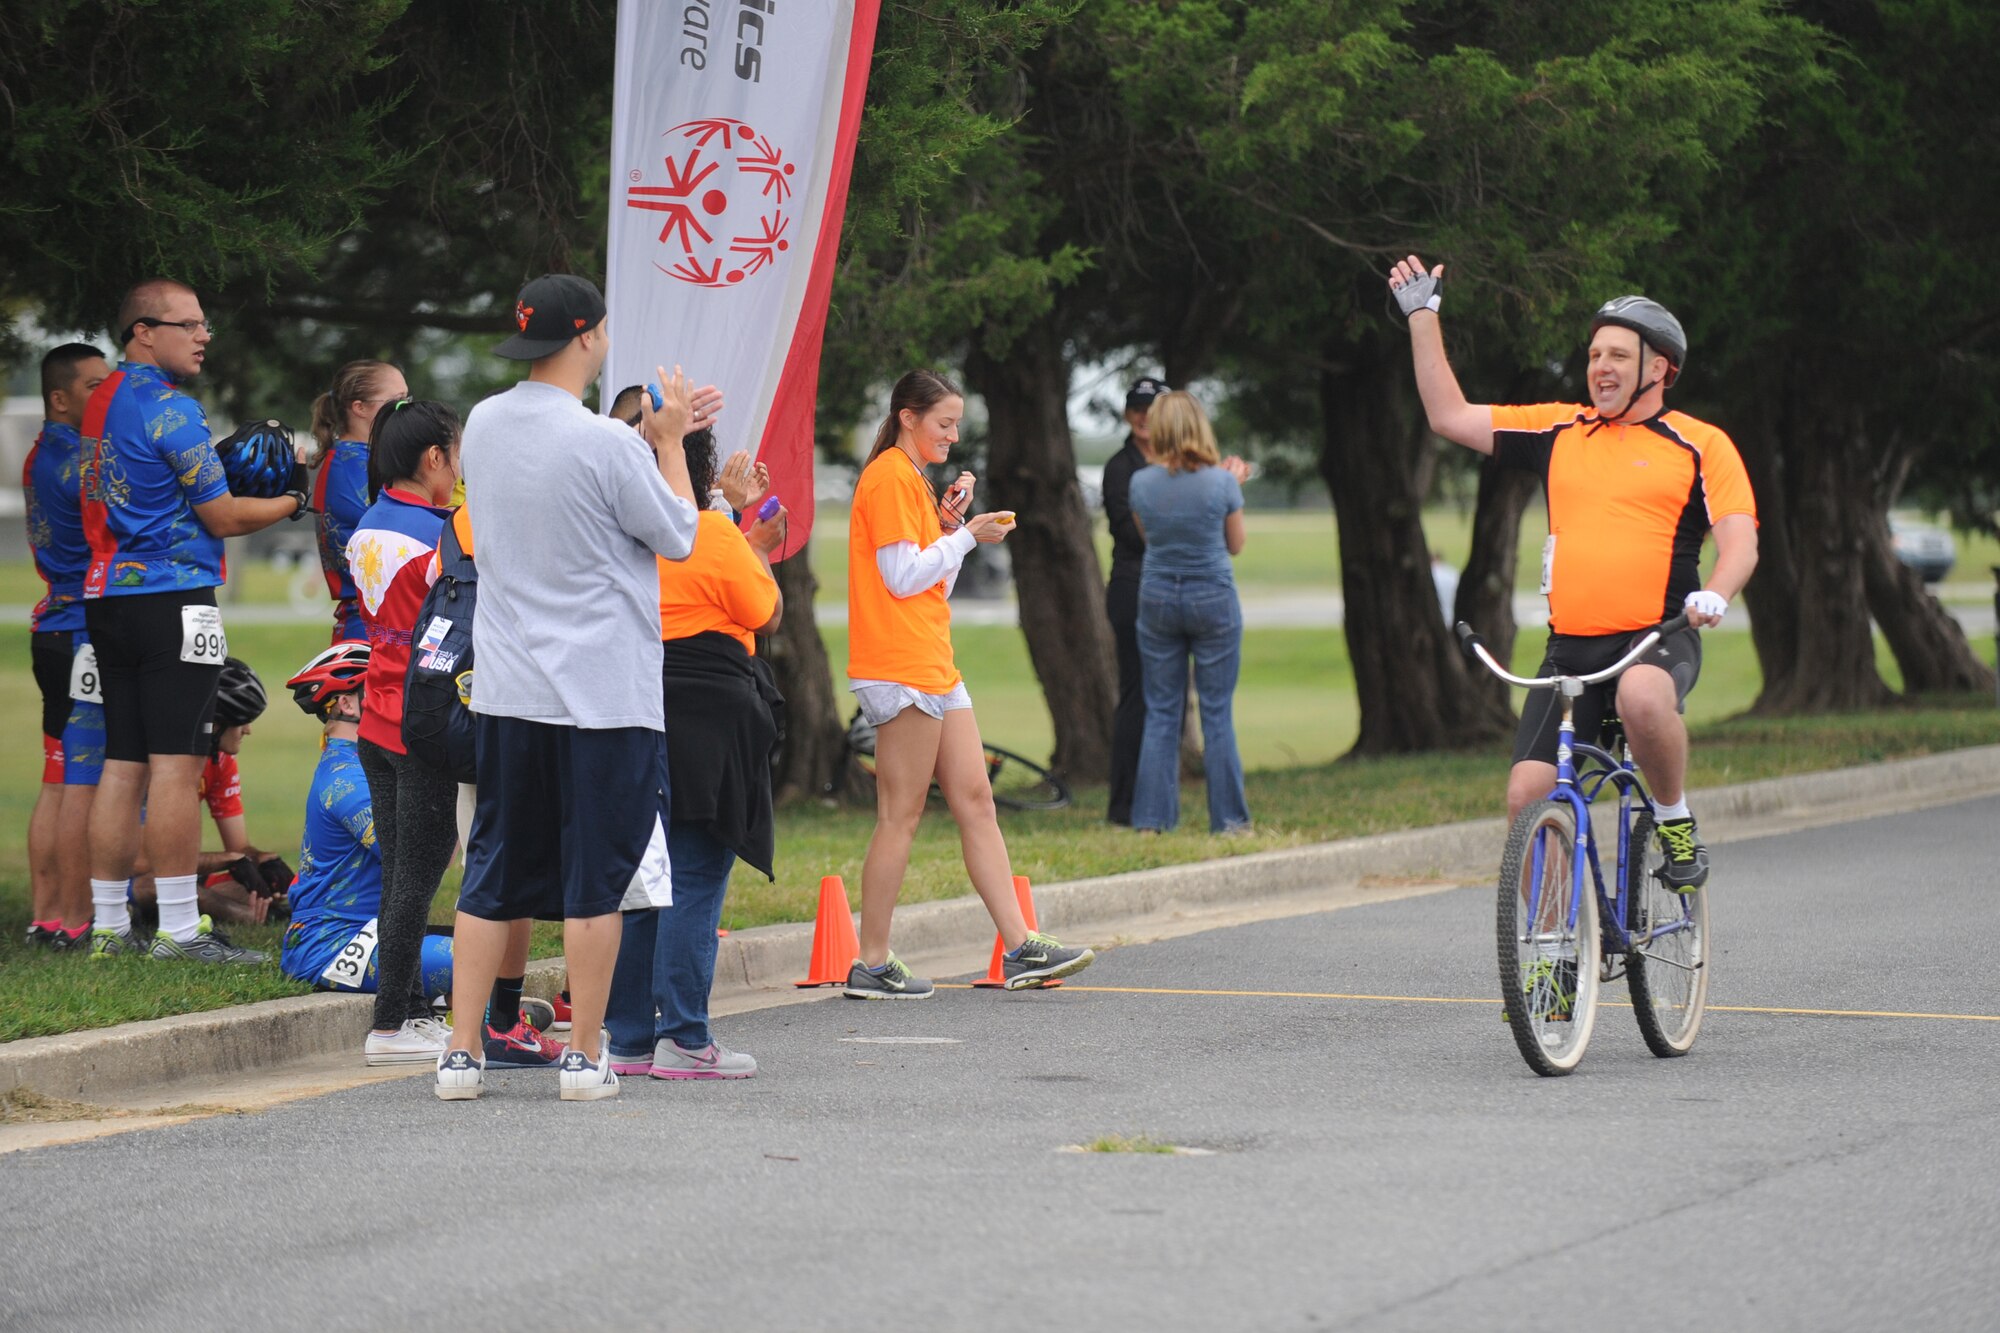 A Special Olympics of Delaware Cycling Competition athlete waves at supporters as he passes the finish line Sept. 13, 2014 at Dover Air Force Base, Del. The Special Olympics are held for children and adults with intellectual disabilities. (U.S. Air Force photo/Staff Sgt. Elizabeth Morris)